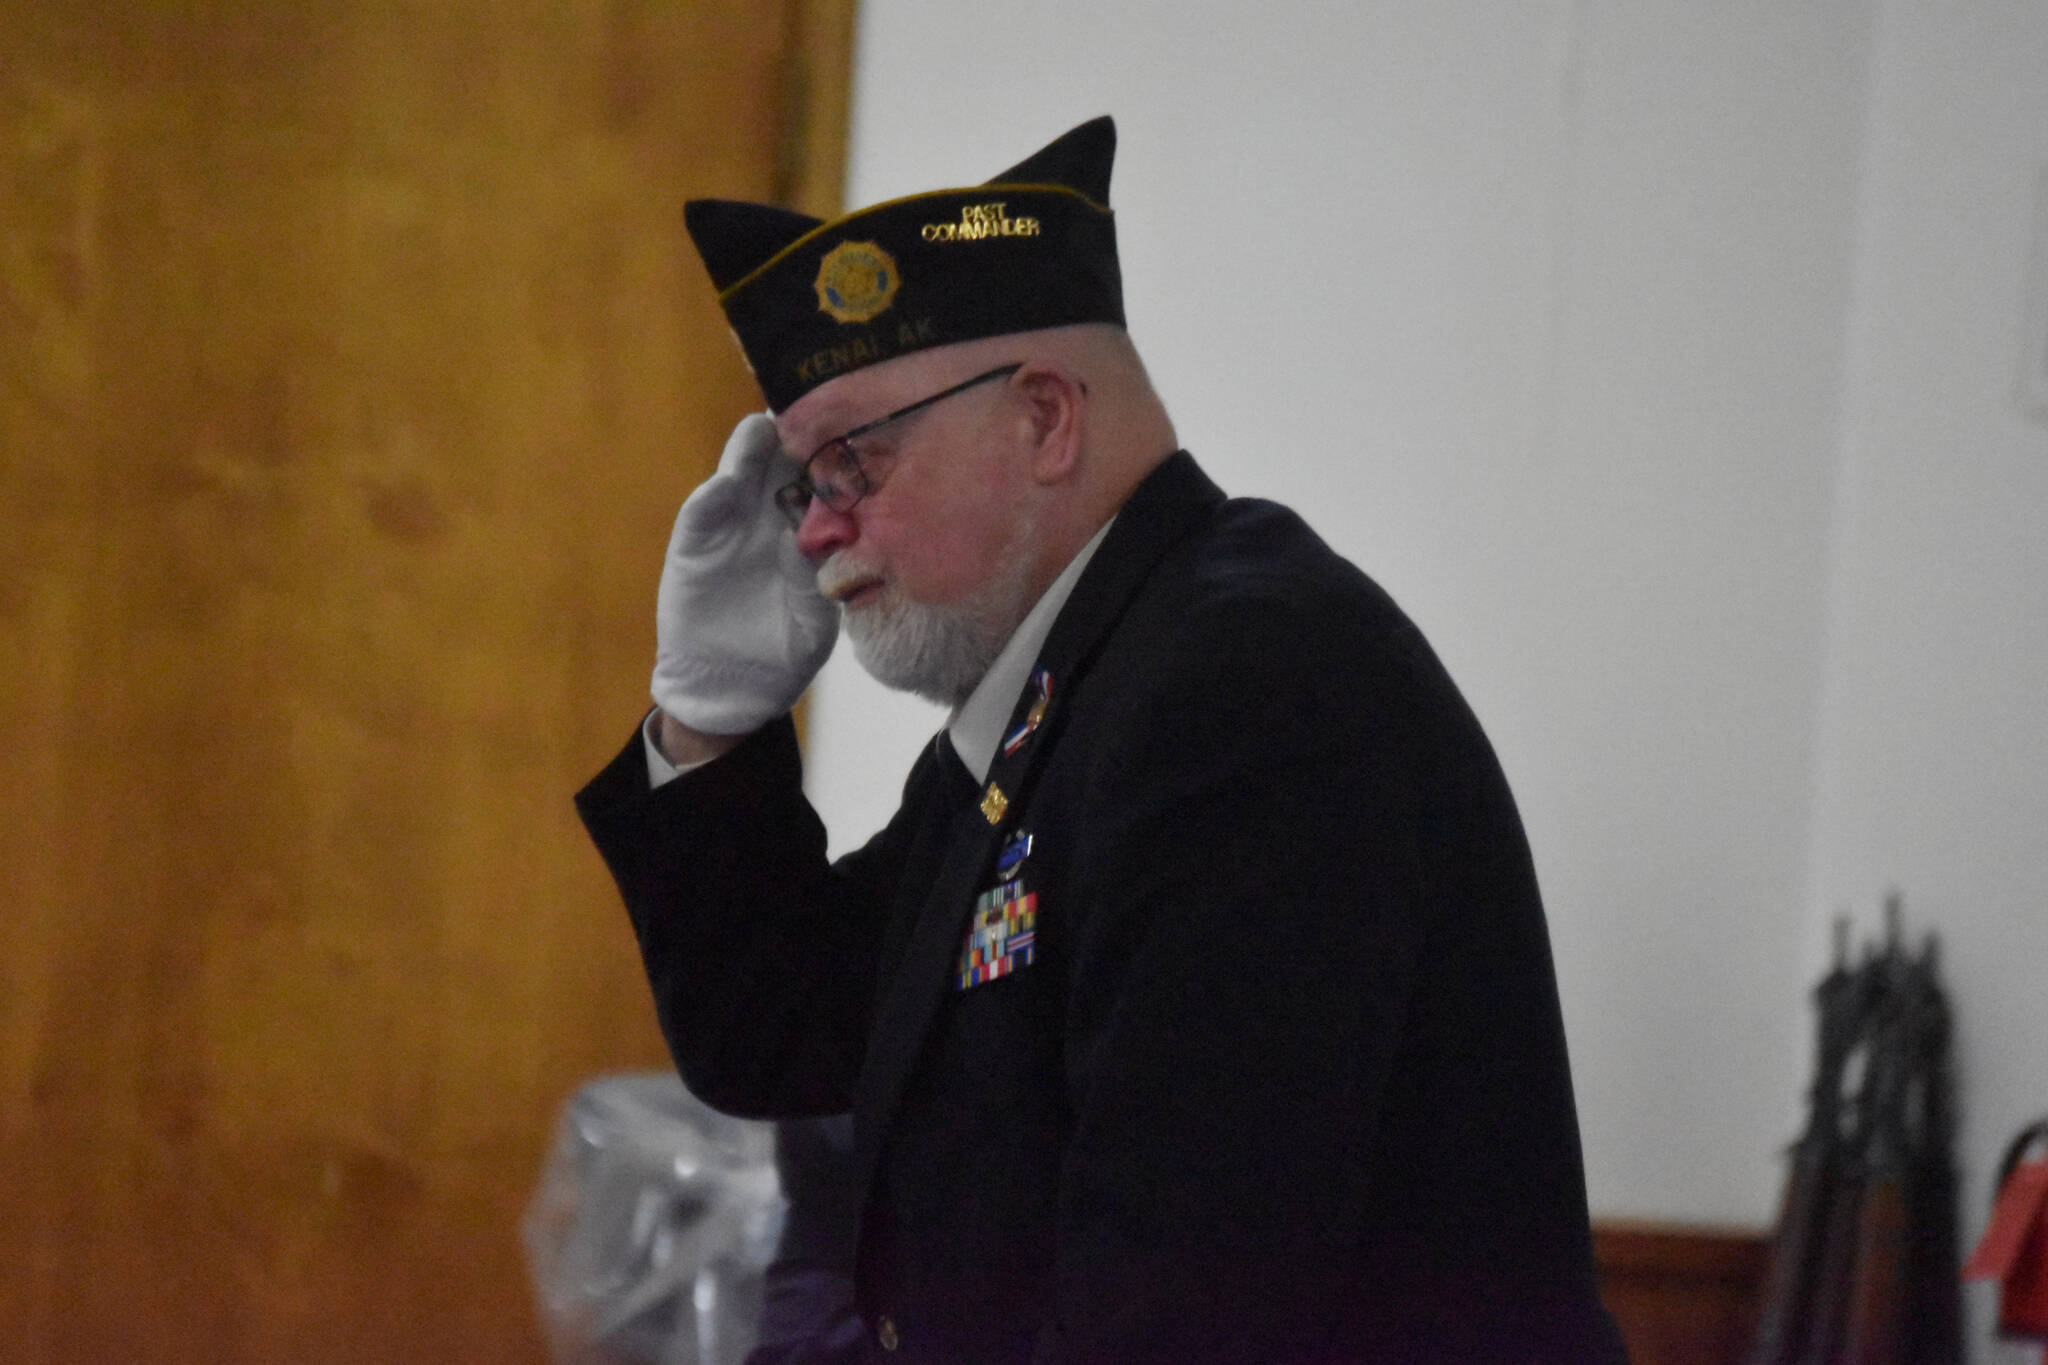 Greg Fite is recognized as a previous commander of an American Legion Post at a celebration of Veterans Day at American Legion Post 20 in Kenai, Alaska, on Friday, Nov. 11, 2022. (Jake Dye/Peninsula Clarion)